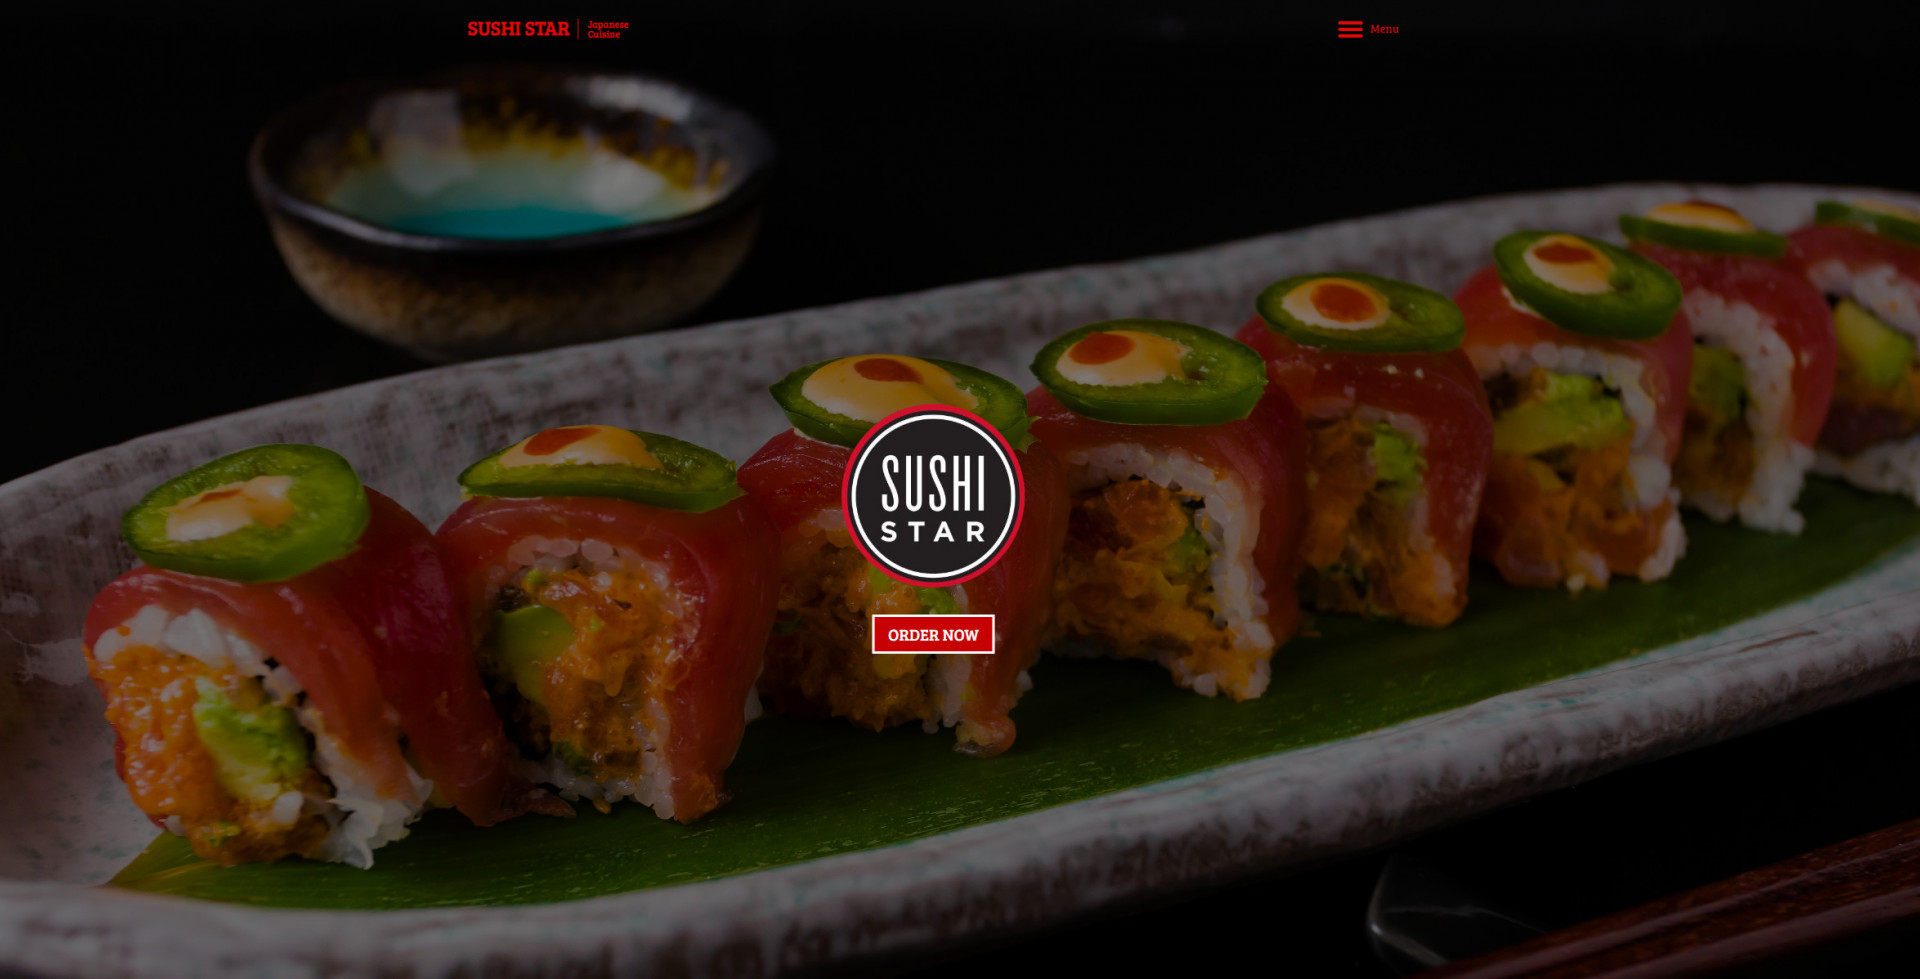 An example of a website design for restaurants that serve sushi